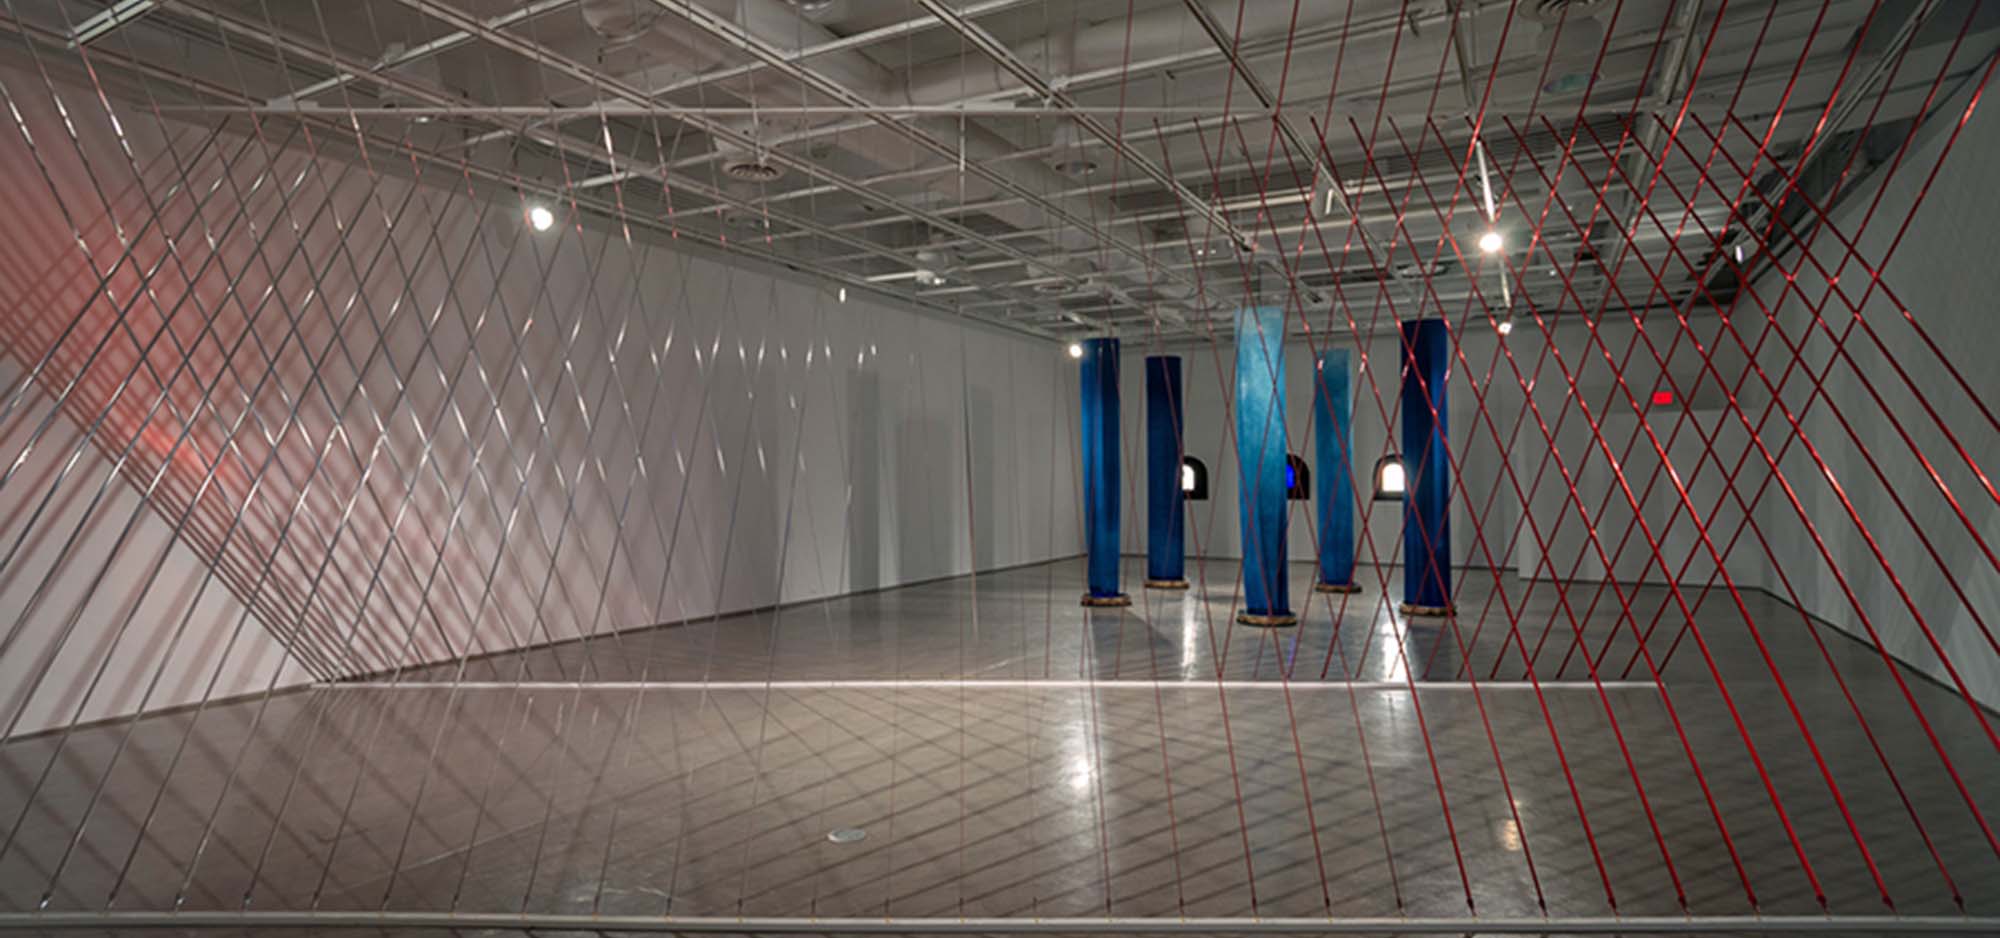 Modern art display with blue pillars and red wires.